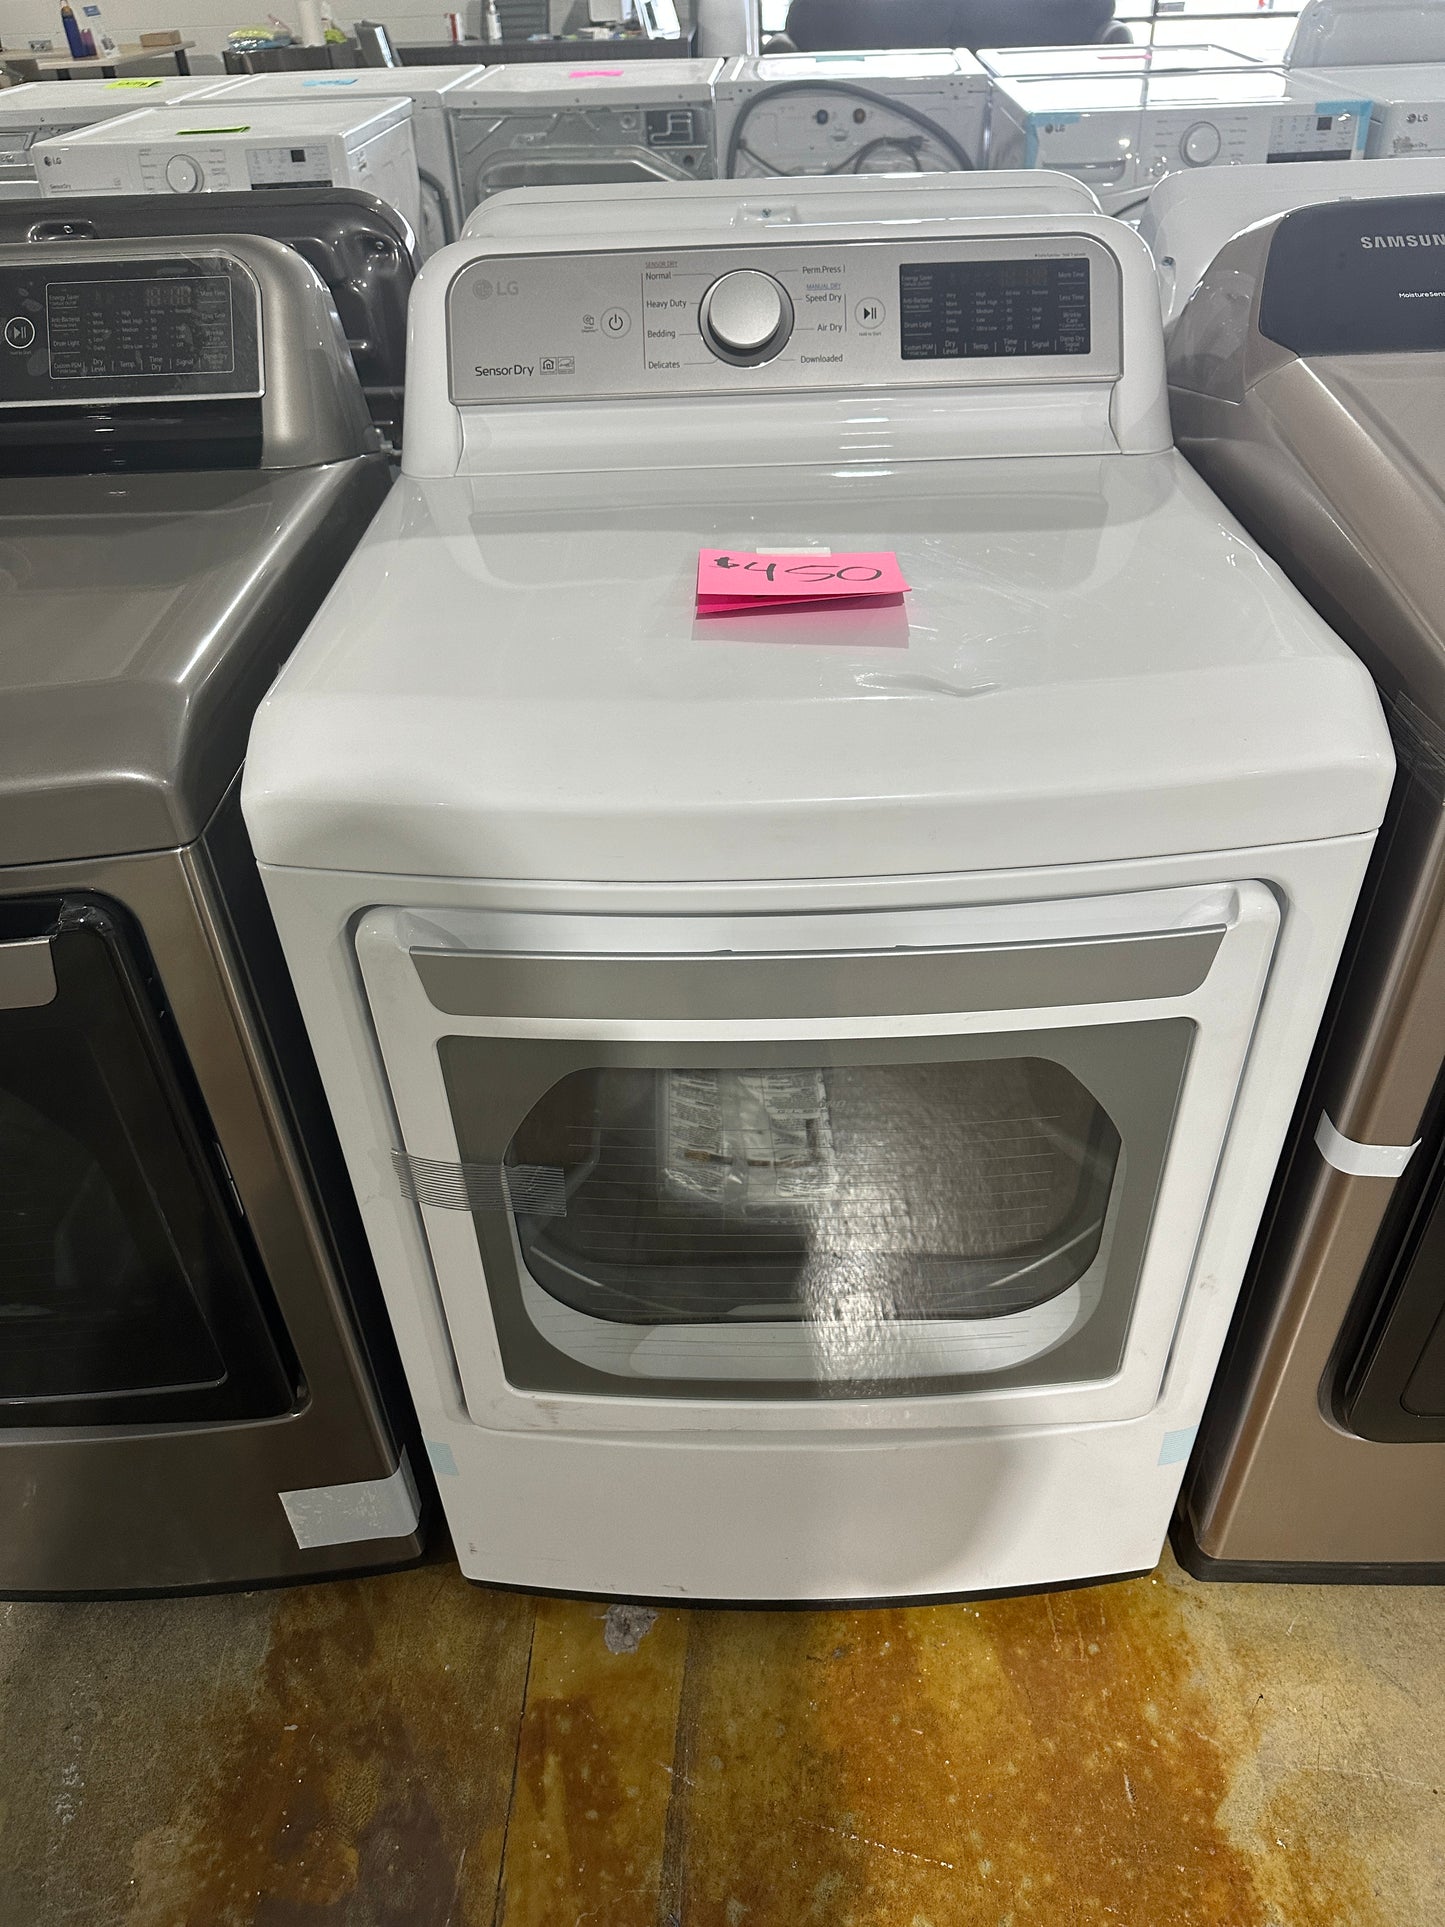 SMART ELECTRIC LG DRYER WITH SENSOR DRY - DRY11553S DLE7300WE